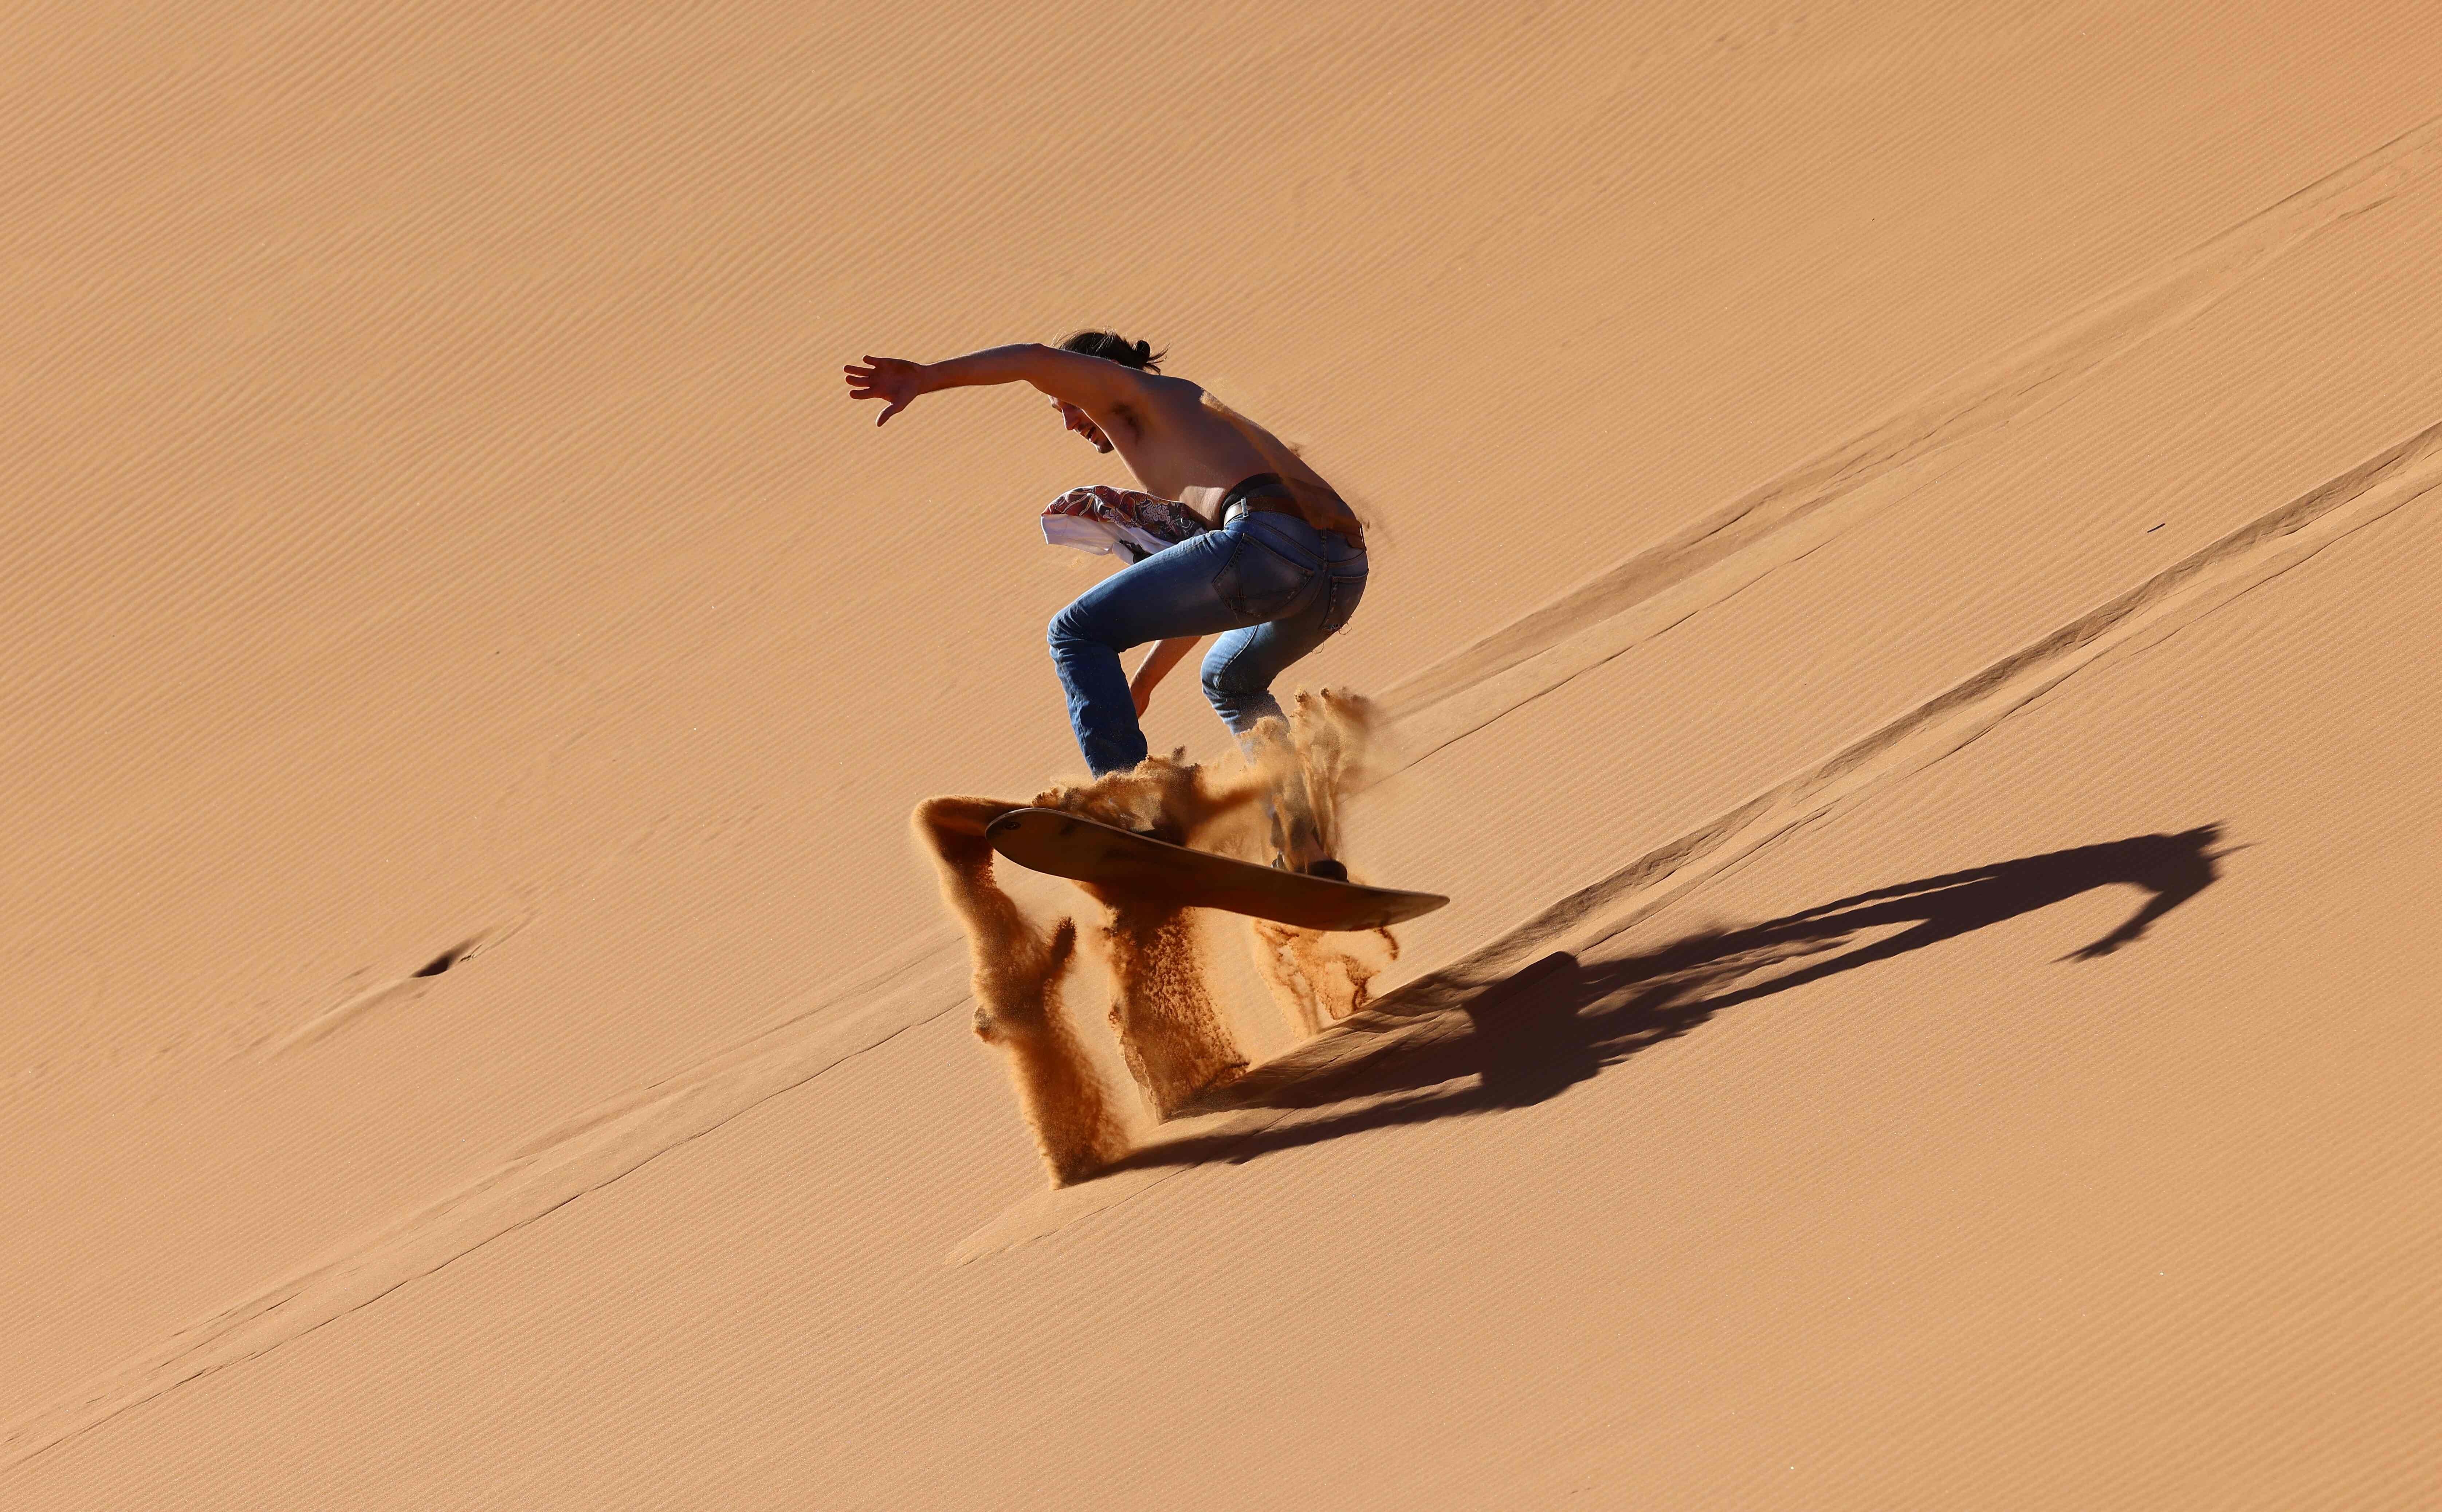 A tourist sandboarding in the Dubai desert, in the United Arab Emirates. Dubai has flung its doors open, branding itself as a sunny, quarantine-free escape from Covid-19 – despite a sharp rise in cases. Photo: AFP